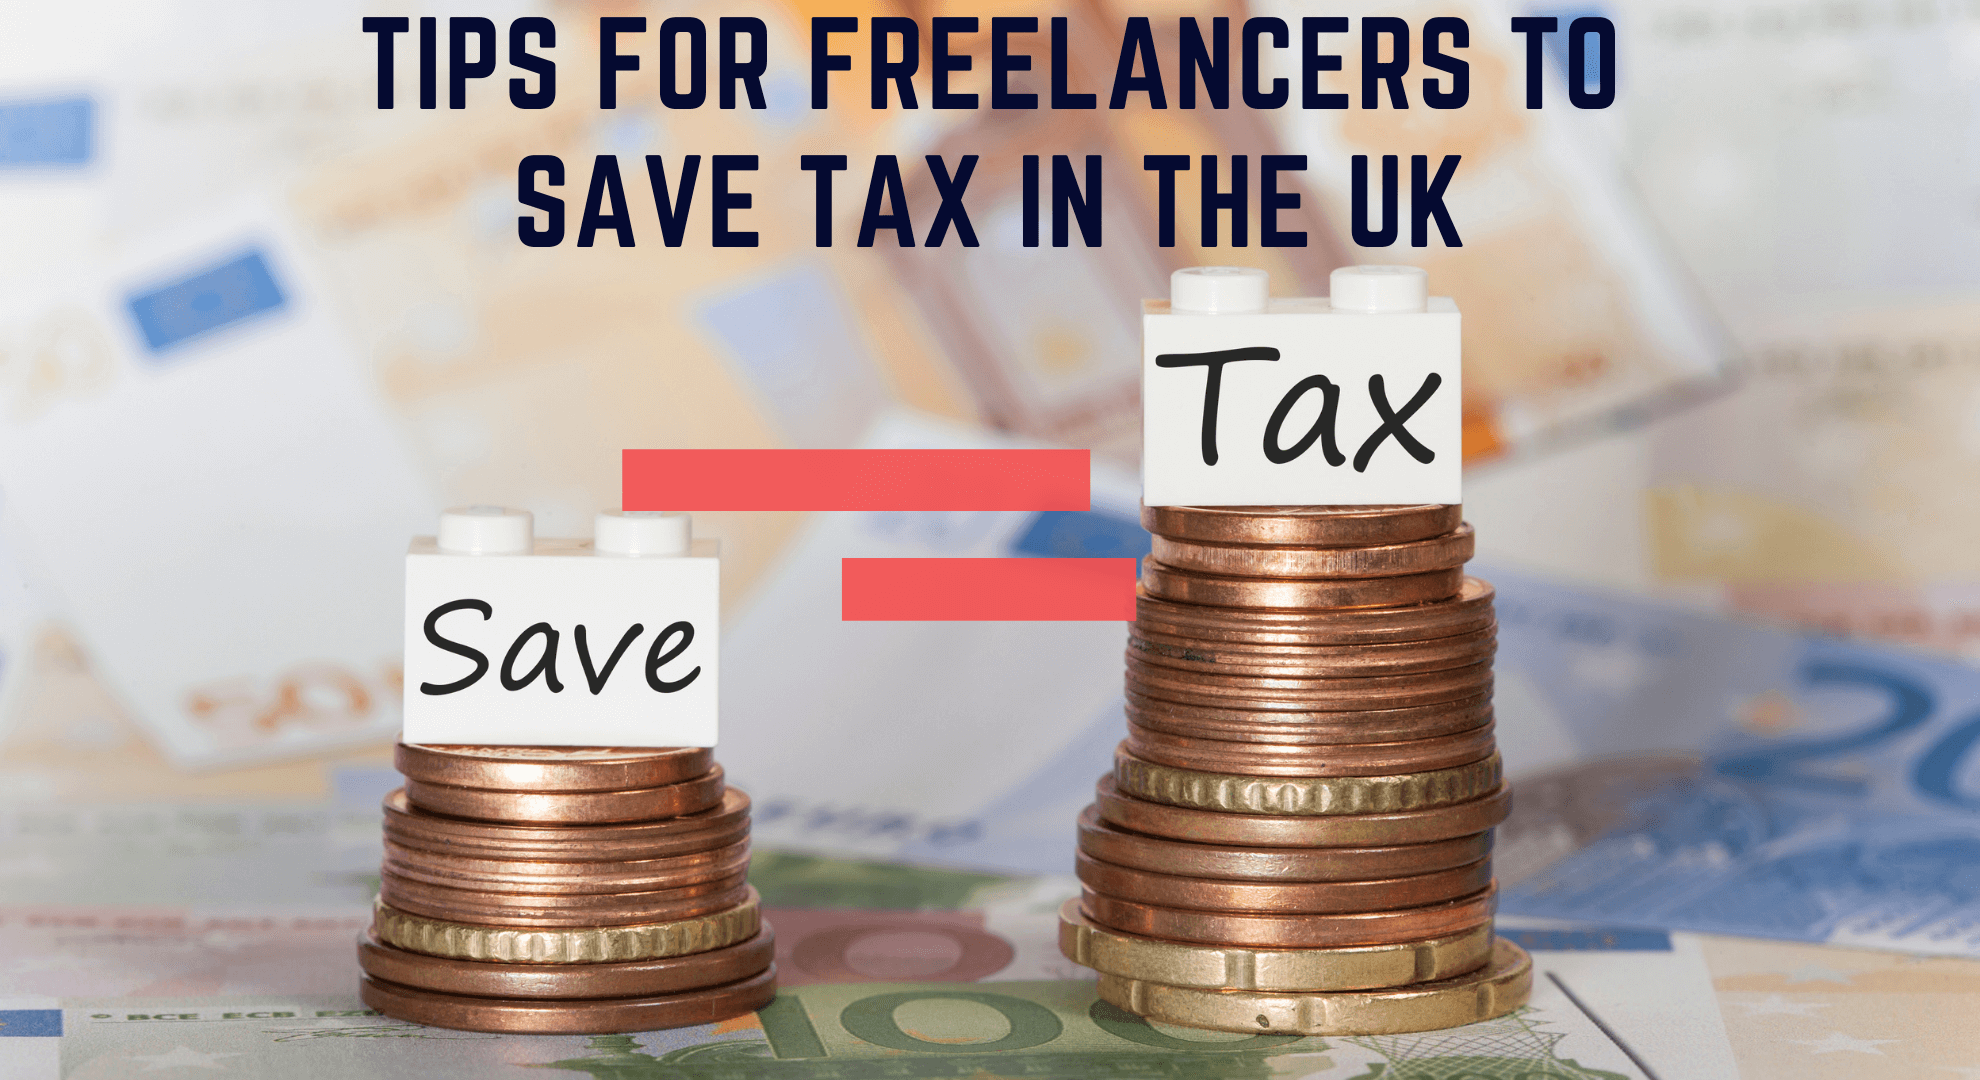 tips-for-freelancers-to-save-tax-in-the-uk-123financials